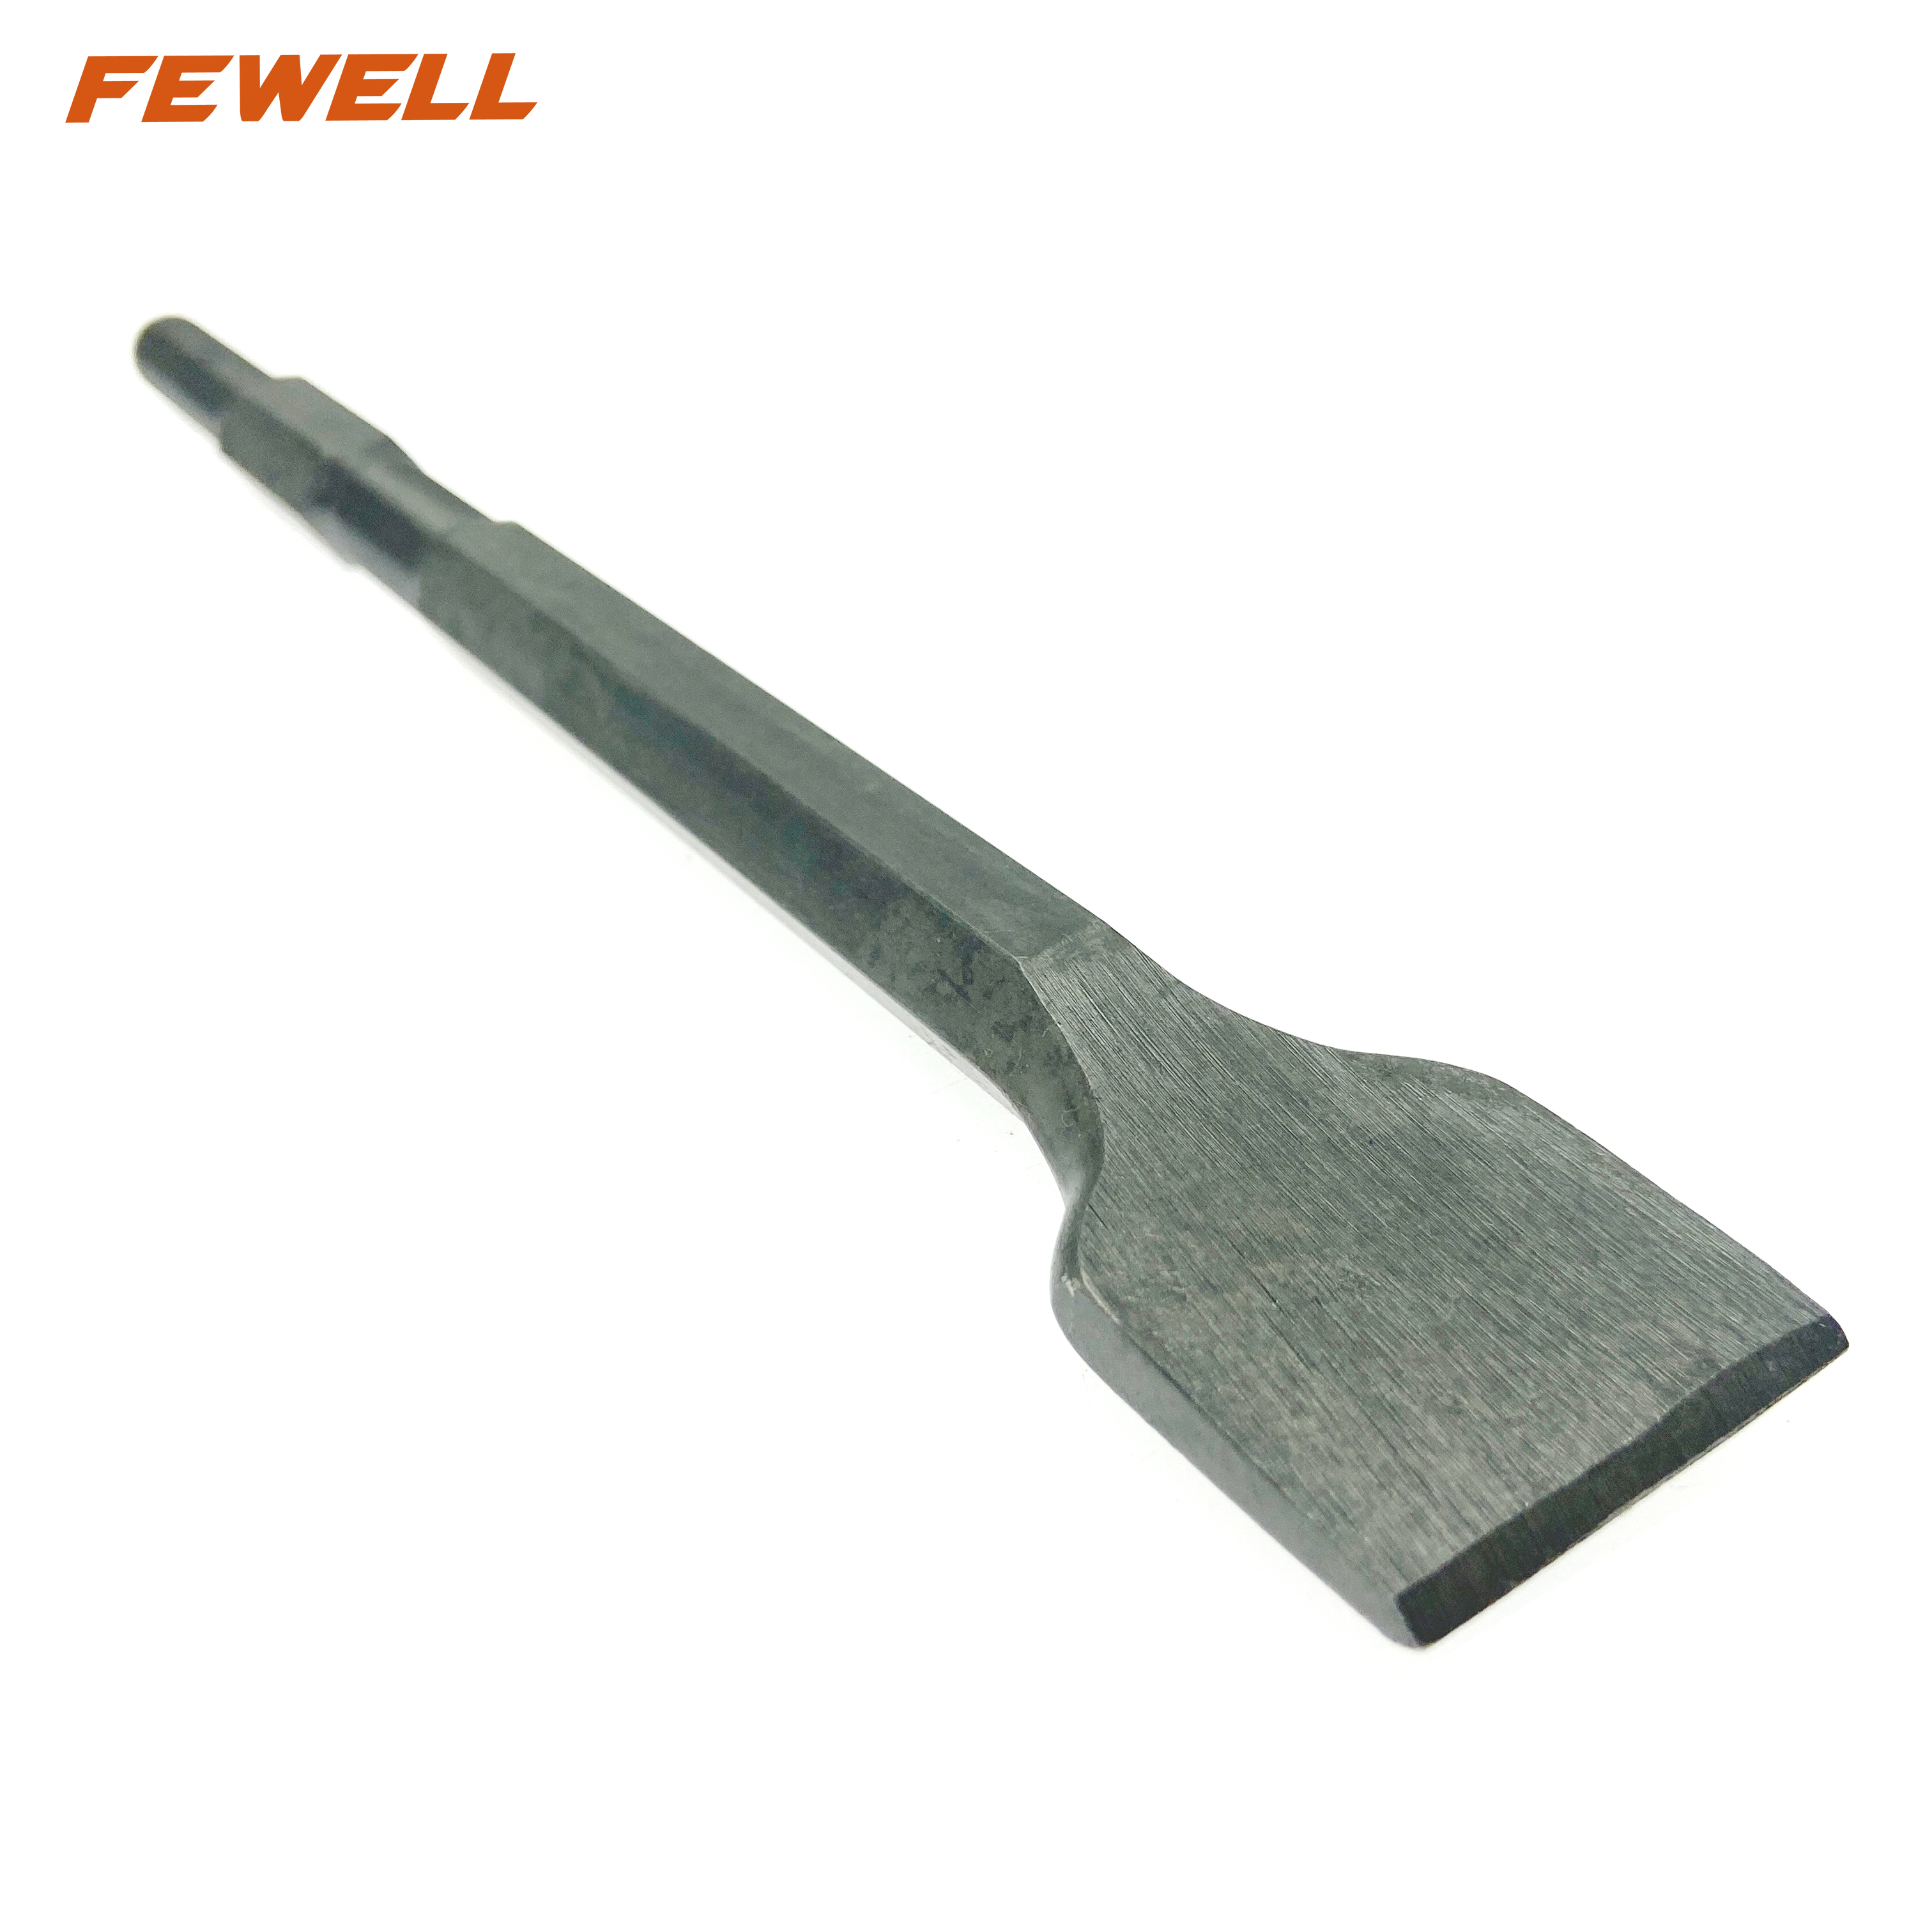 High quality 17x280x40mm Electric Hammer Drill Bit Hex shank Flat Wide Spade Chisel for Masonry Concrete Brick stone